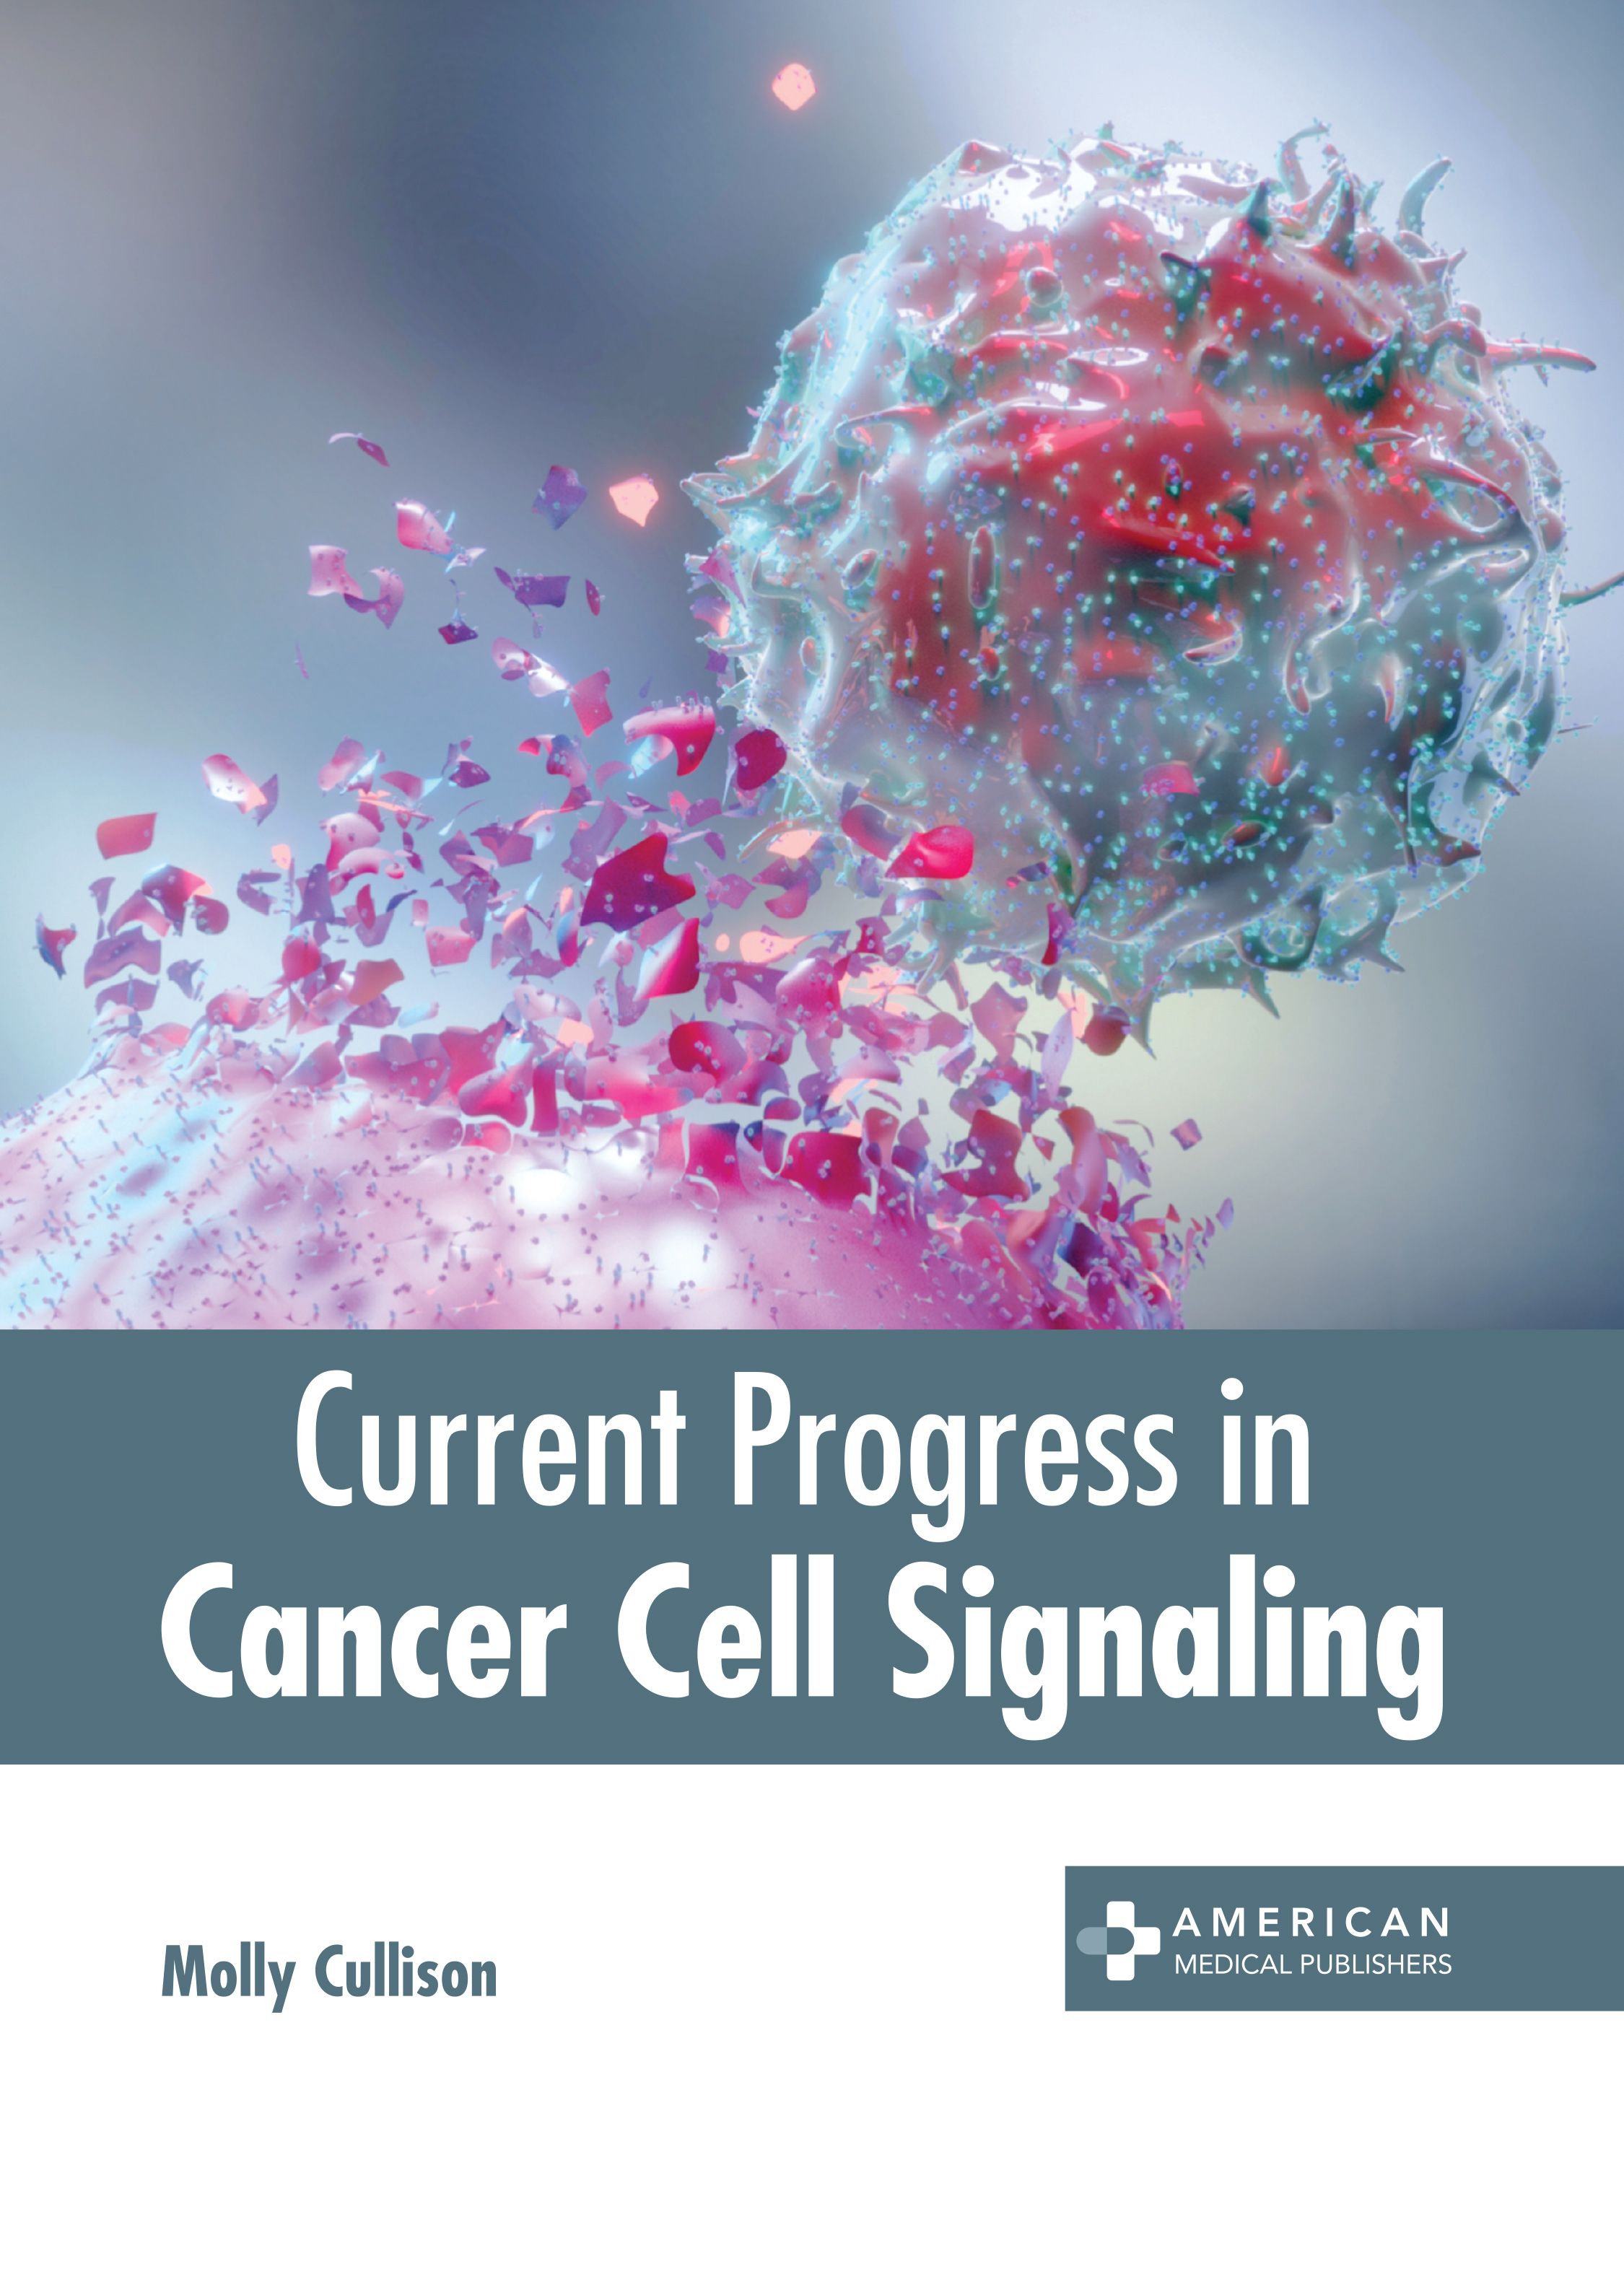 CURRENT PROGRESS IN CANCER CELL SIGNALING